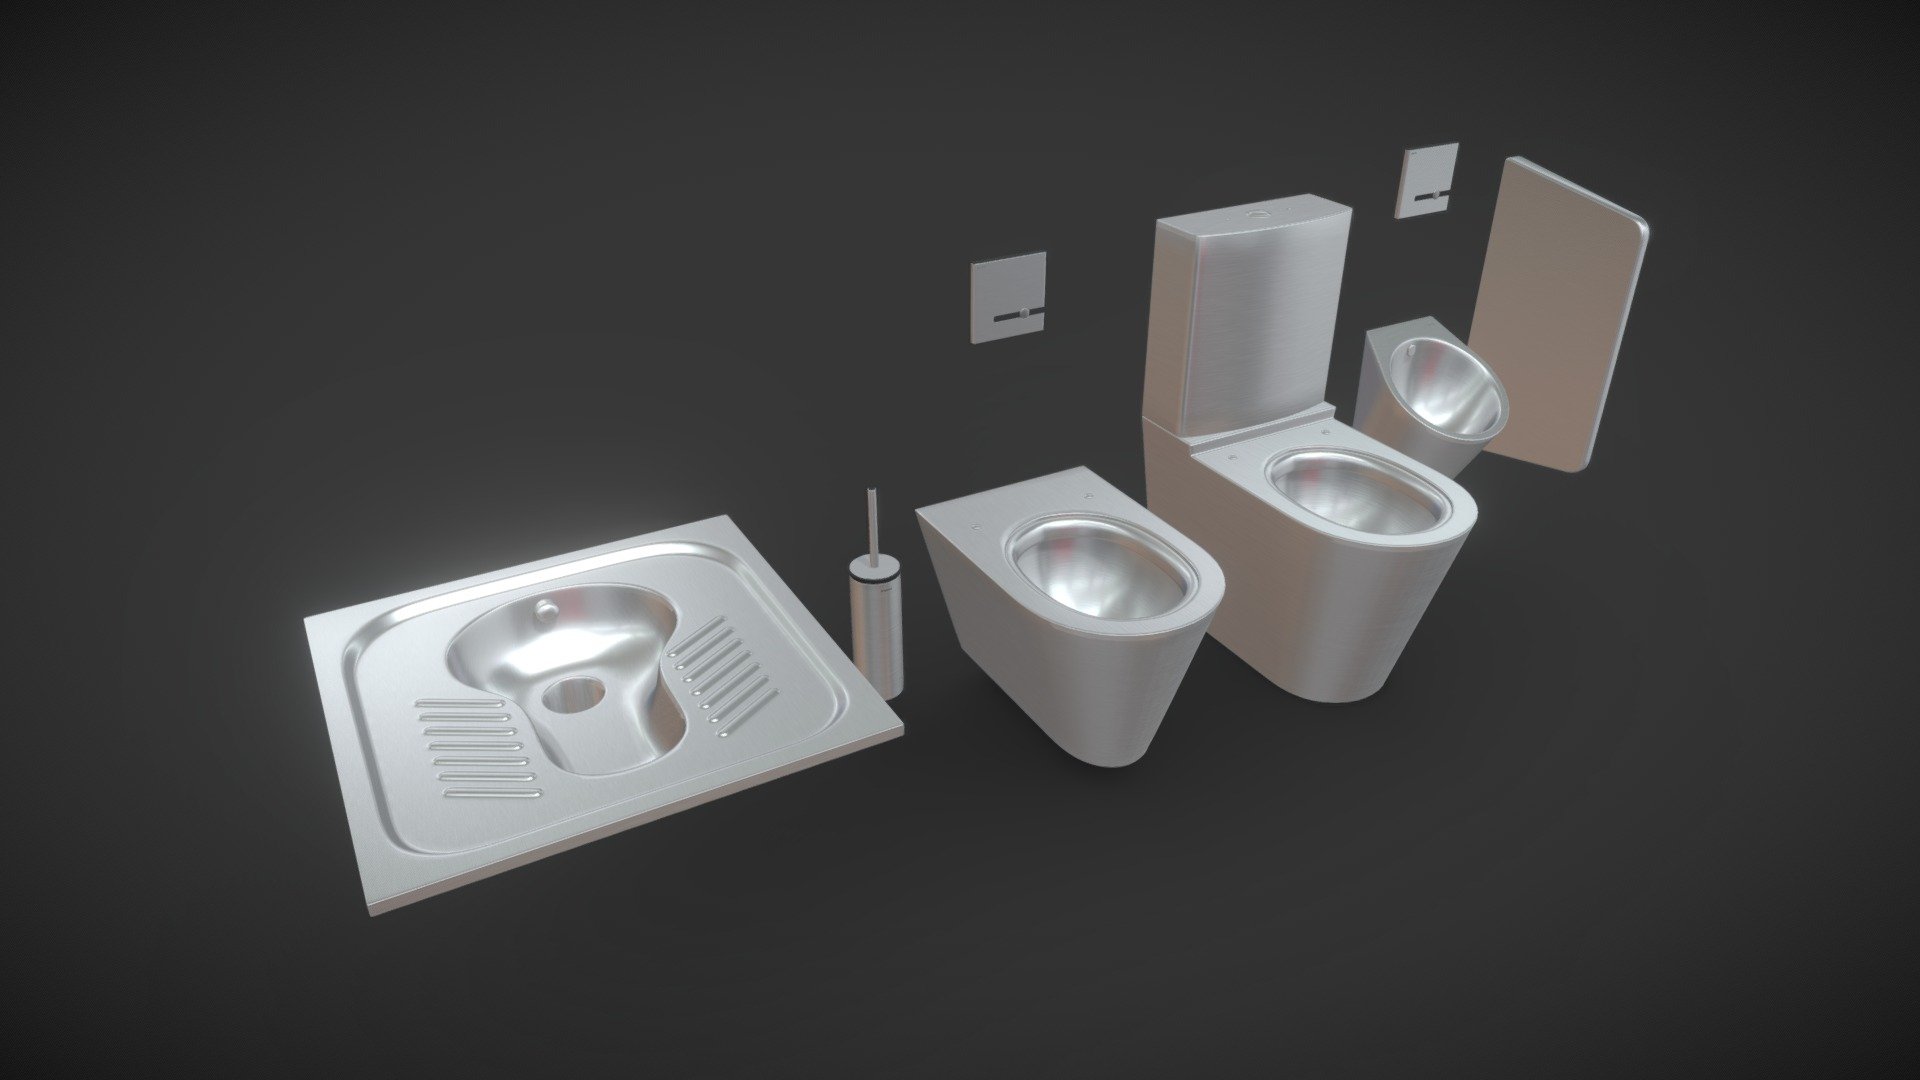 Realistic (copy) 3d model of Toilet bowls and urinal DELABIE.

Topology of geometry:




forms and proportions of The 3D model most similar to the real object

the geometry of the model was created very neatly

there are no many-sided polygons

detailed enough for close-up renders

Materials and Textures:




3ds max files included Vray-Shaders

3ds max files included Corona-Shaders

all texture paths are cleared

Organization of scene:




to all objects and materials names in scene are appropriated

real world size (system units - mm)

coordinates of location of the model in space (x0, y0, z0)

does not contain extraneous or hidden objects (lights, cameras, shapes etc.)

File Formats:




original file format - 3ds max 2013 + Vray

3ds max 2013 Corona

obj

3ds

blender
 - Toilet bowls and urinal DELABIE - Buy Royalty Free 3D model by madMIX 3d model